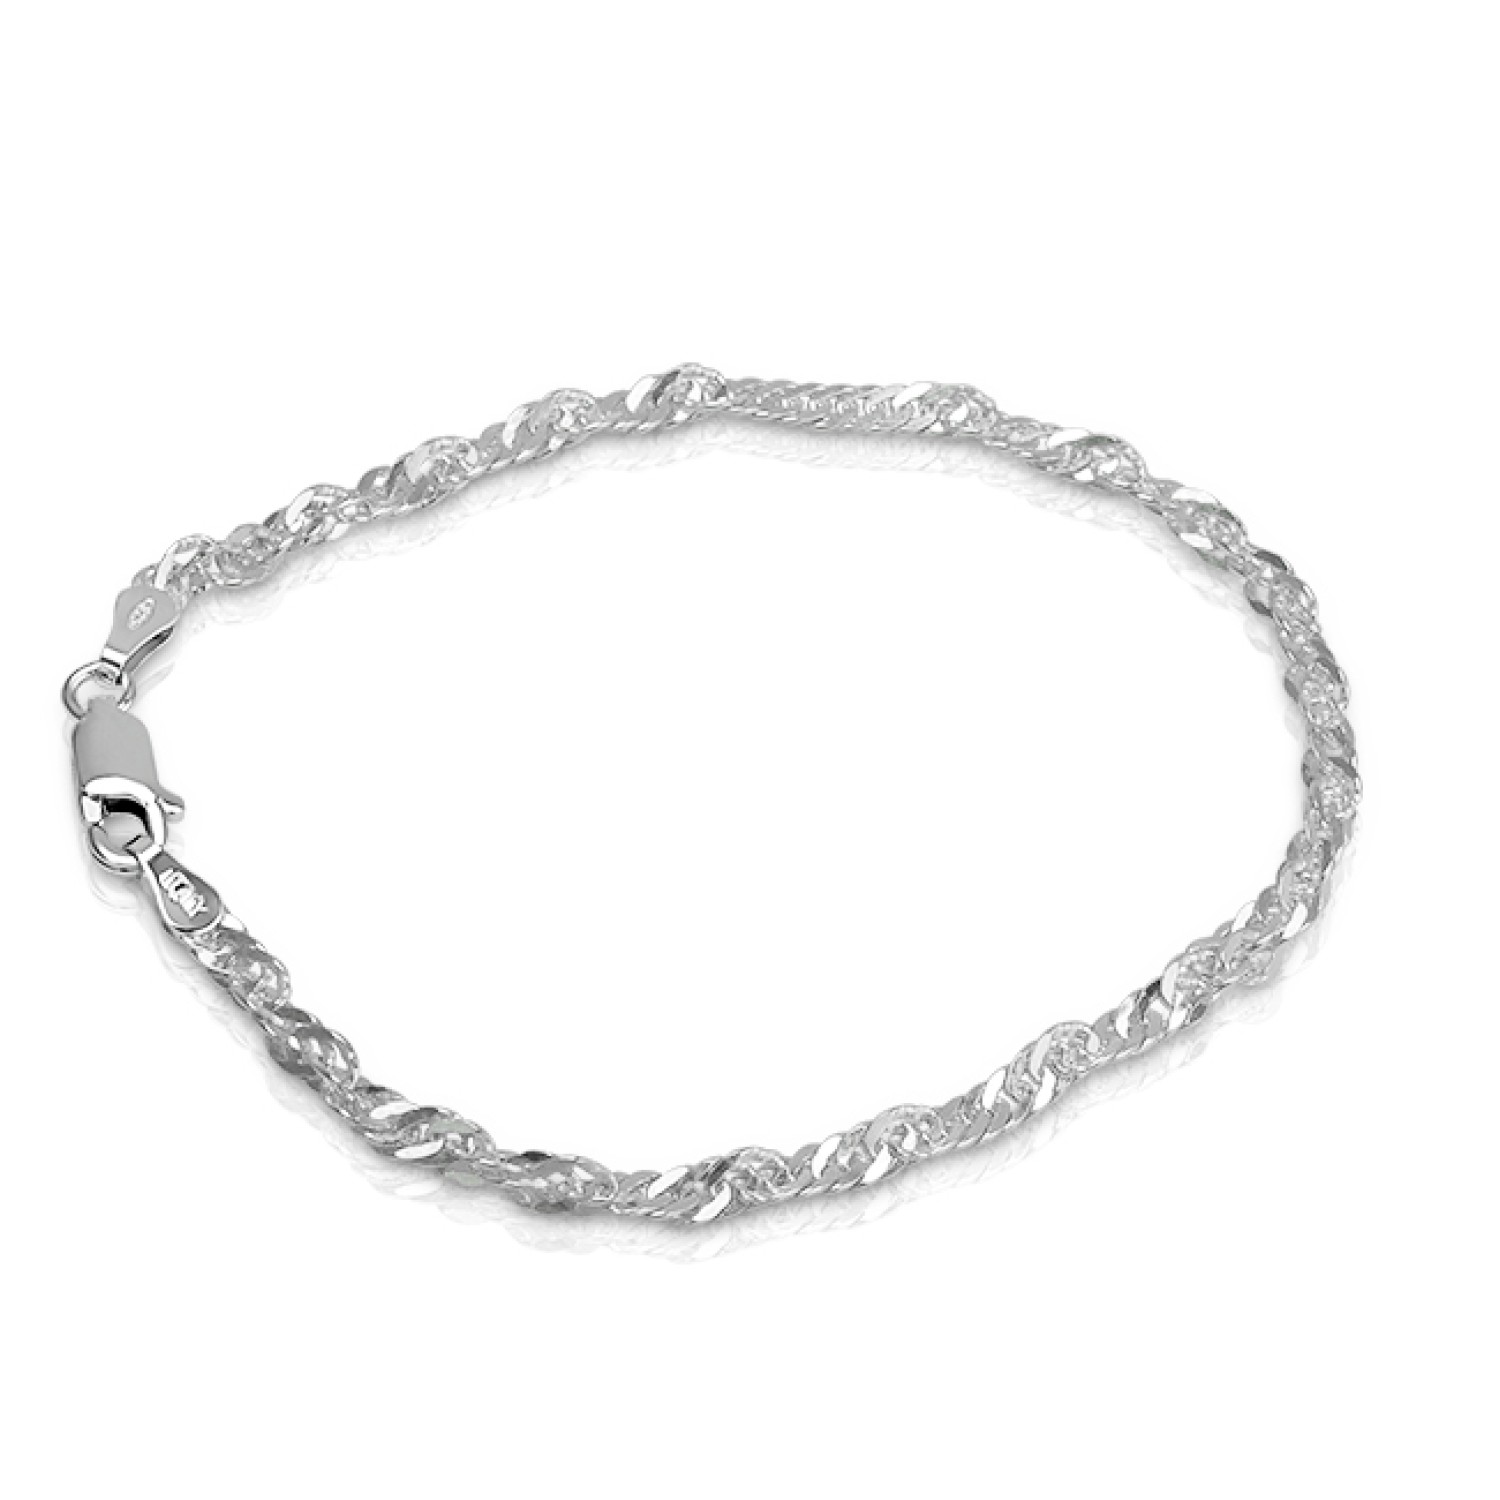 Silver Singapore Twist. The Singapore twist style chain is always popular as it looks so good and catches the light. Available at Christies Jewellery in-store or online Crafted in 925 Sterling Silver 19mm in length Gift wrapped 5 Year Writt @christies.onl